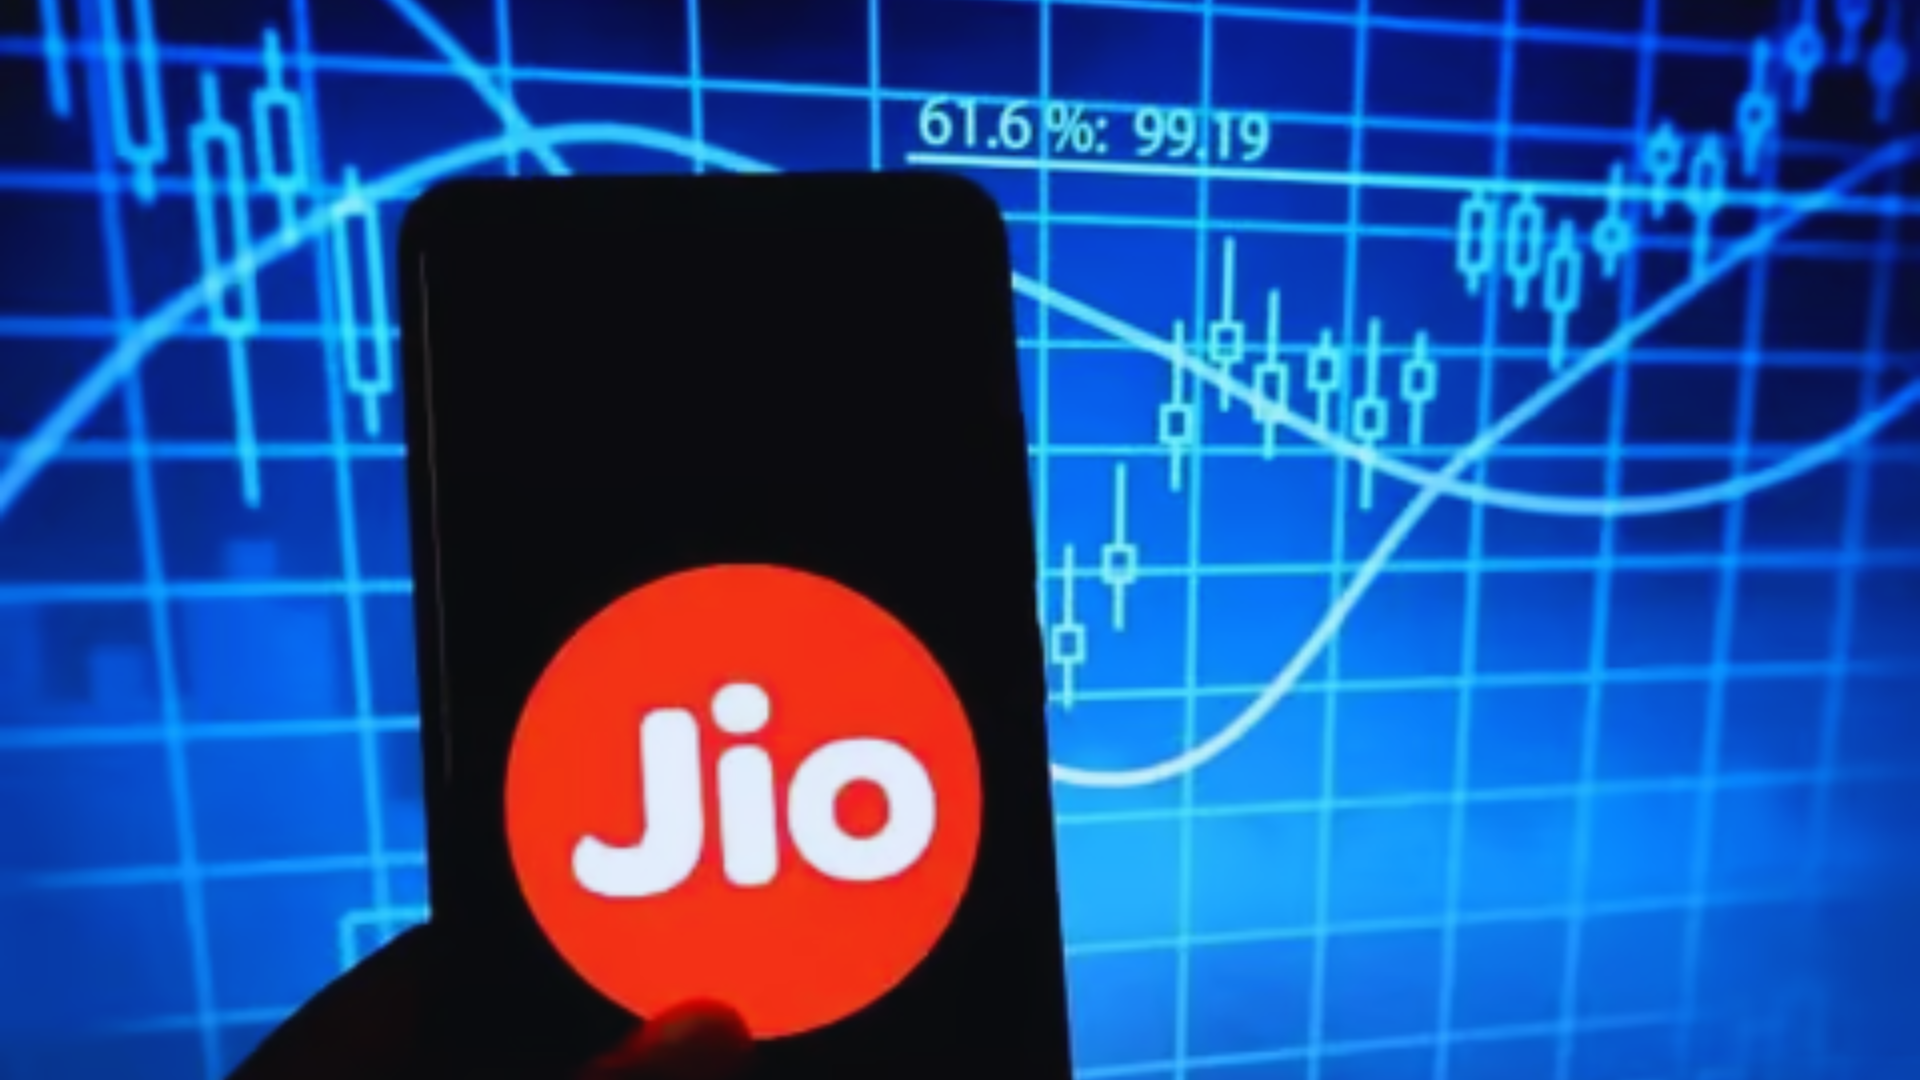 Jio Down: Jio Users Facing Major Network Disturbance, Unable To Access X, YouTube, Snapchat, Instagram